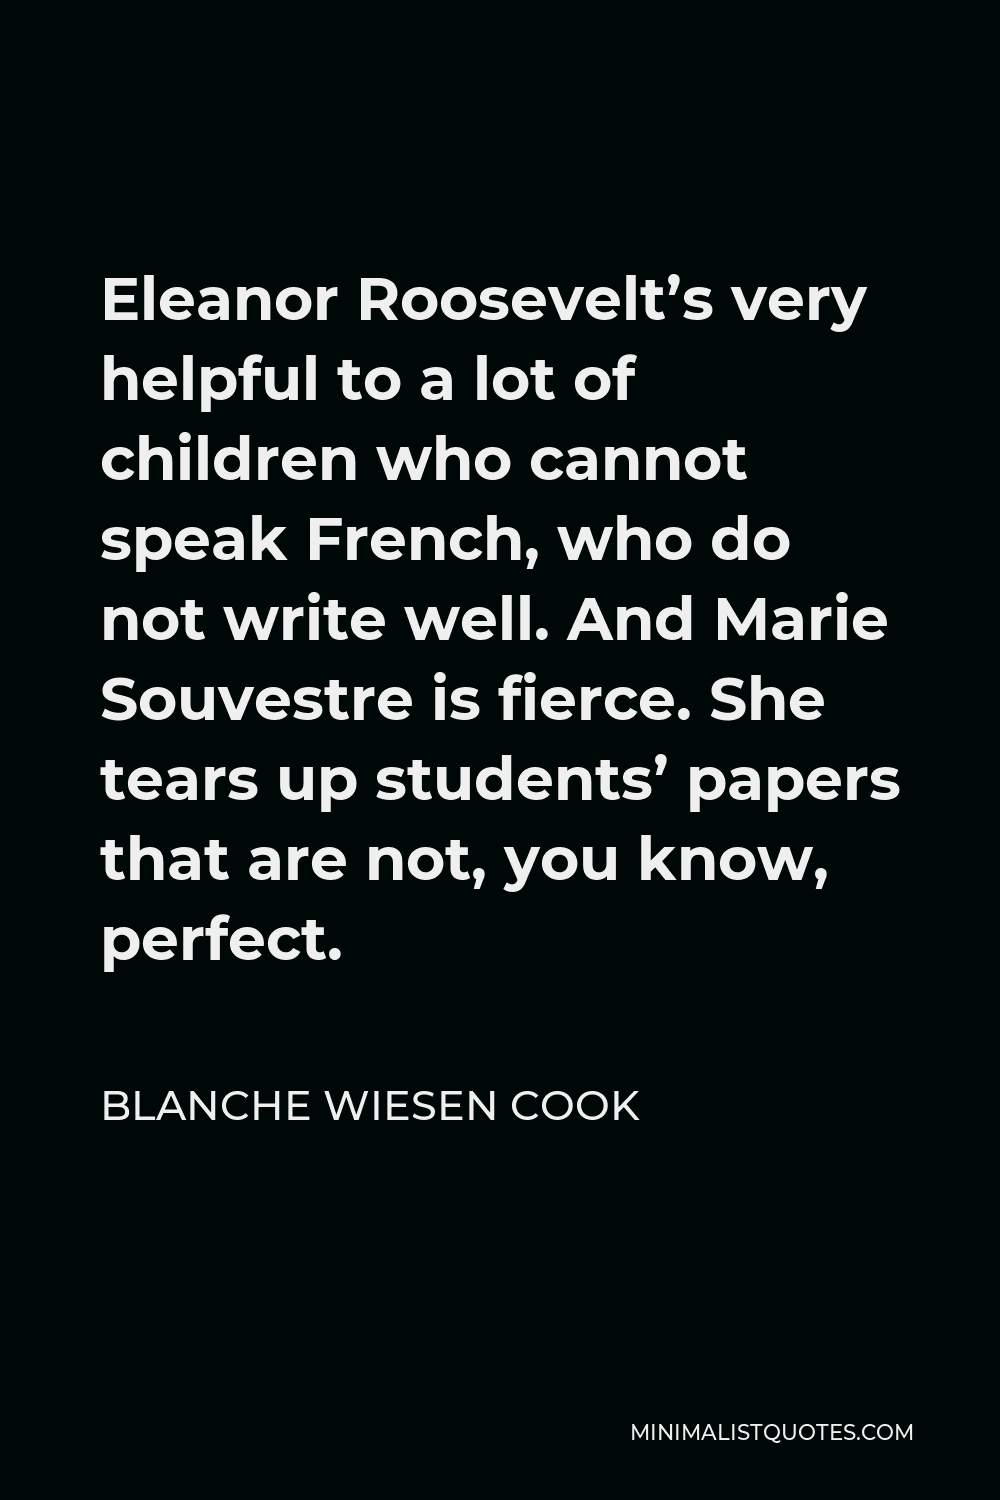 Blanche Wiesen Cook Quote - Eleanor Roosevelt’s very helpful to a lot of children who cannot speak French, who do not write well. And Marie Souvestre is fierce. She tears up students’ papers that are not, you know, perfect.